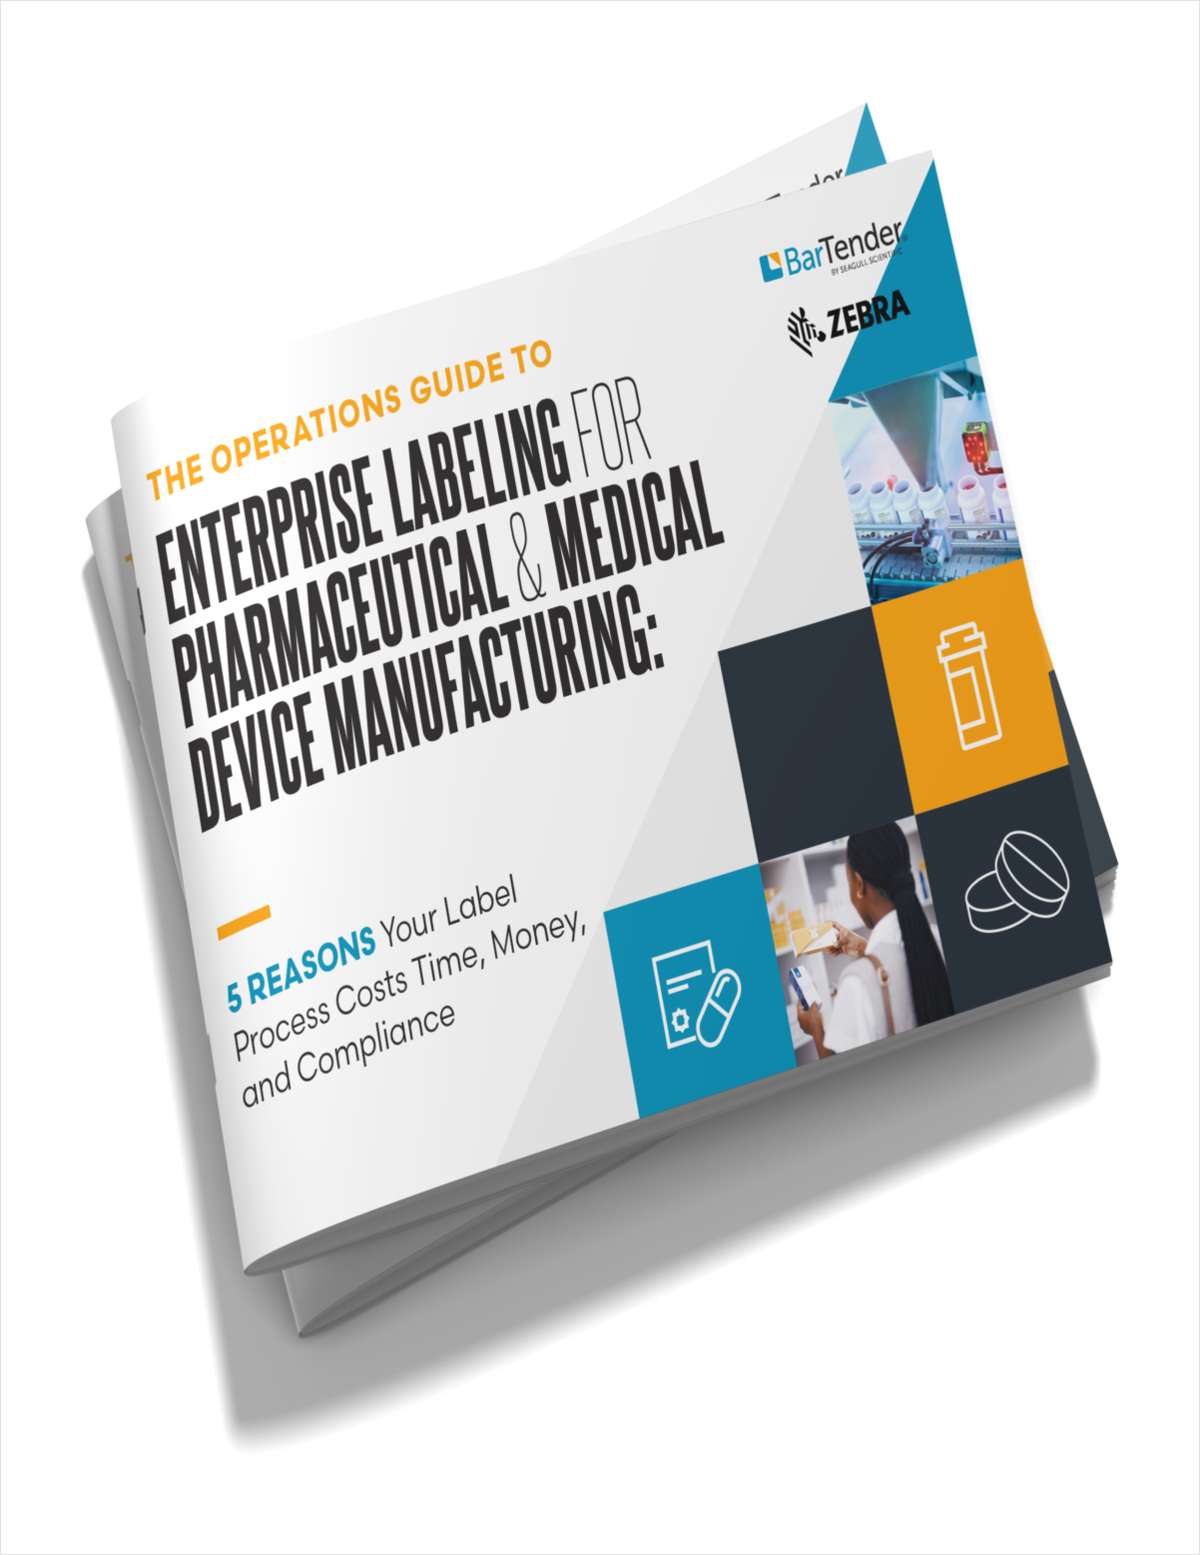 The Operations Guide to Enterprise Labeling for Pharmaceutical & Medical Device Manufacturing